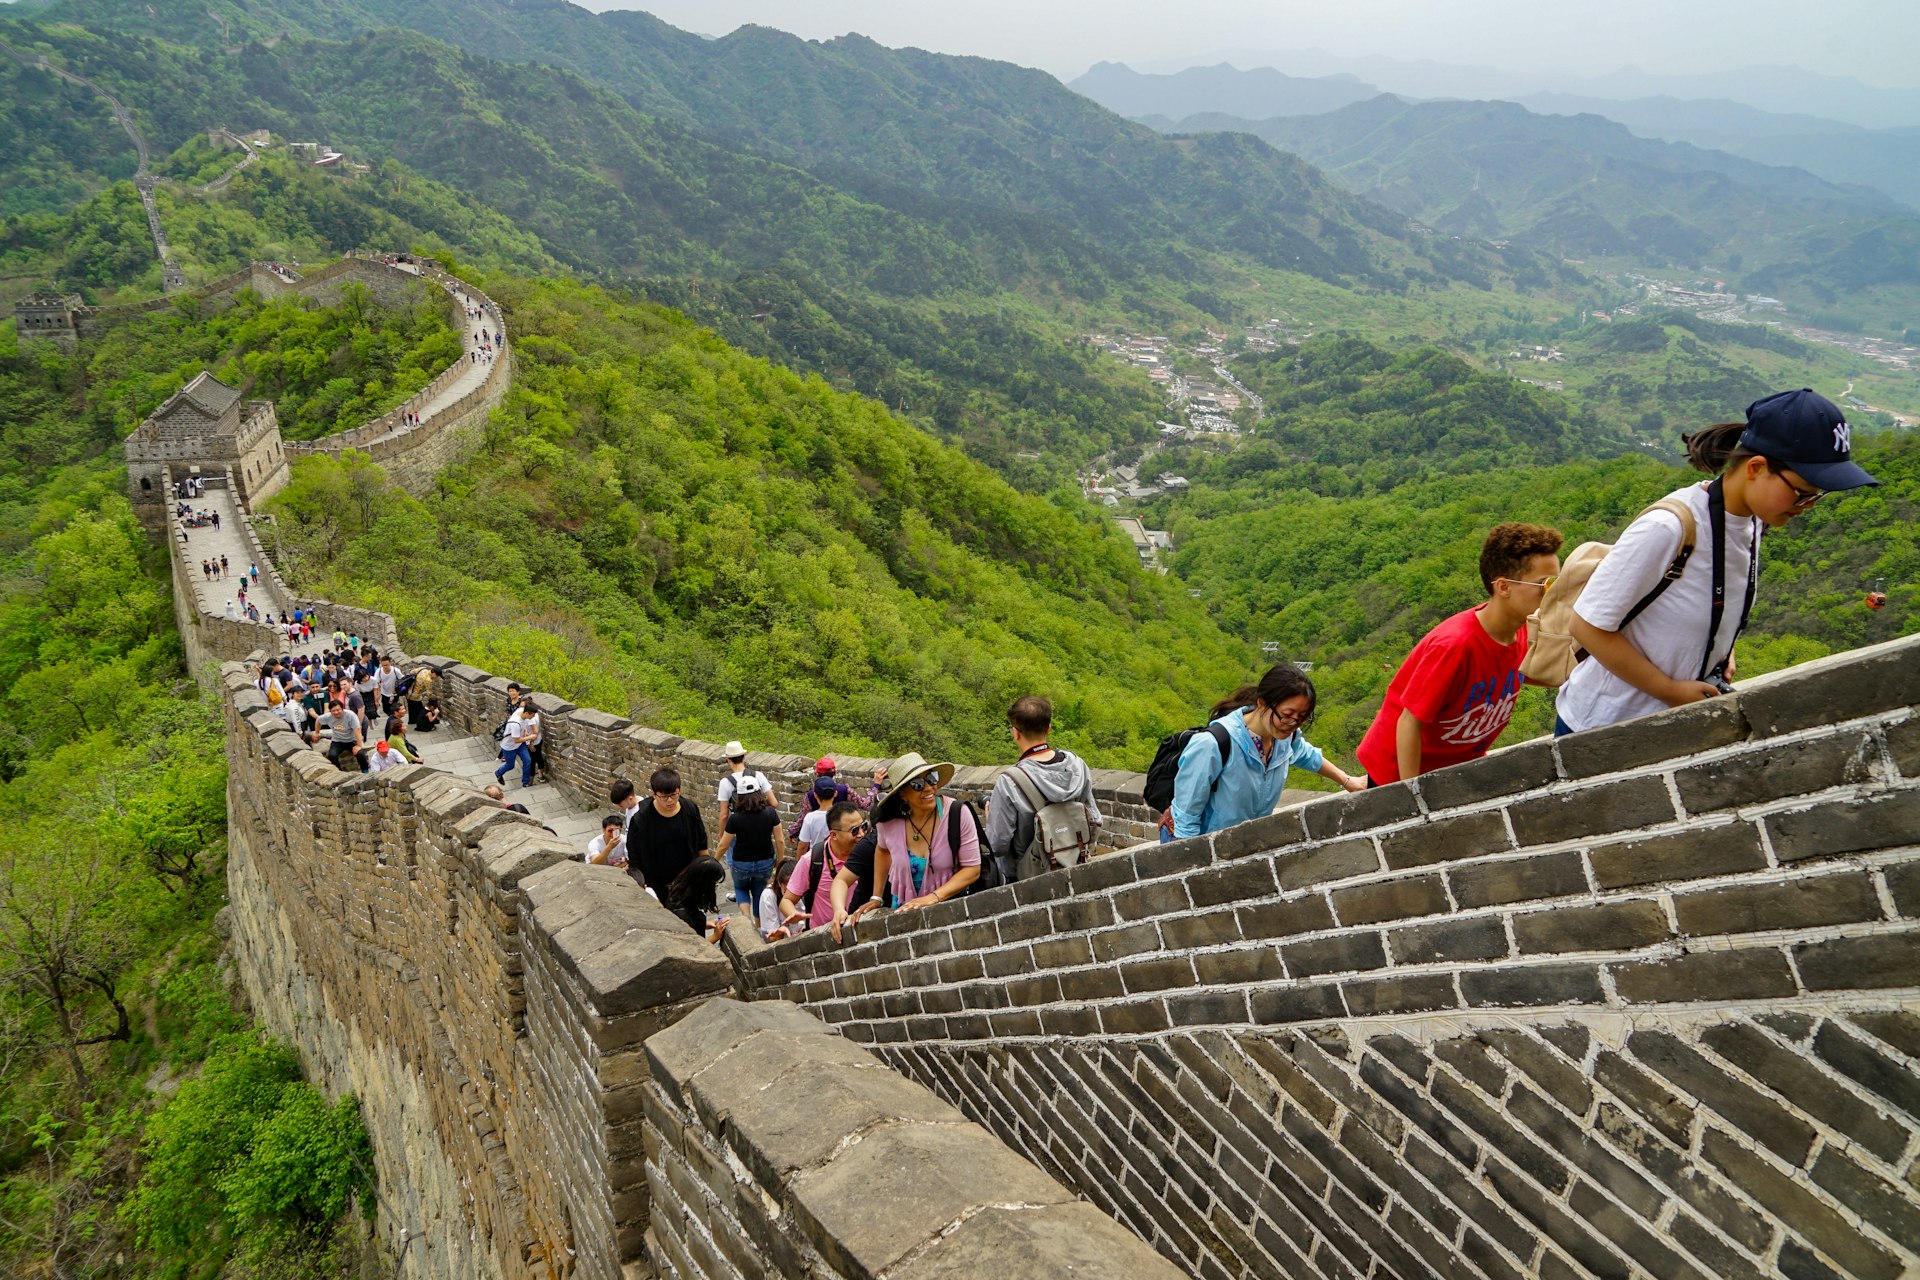 Walkers on the Mutianyu section of the Great Wall of China  